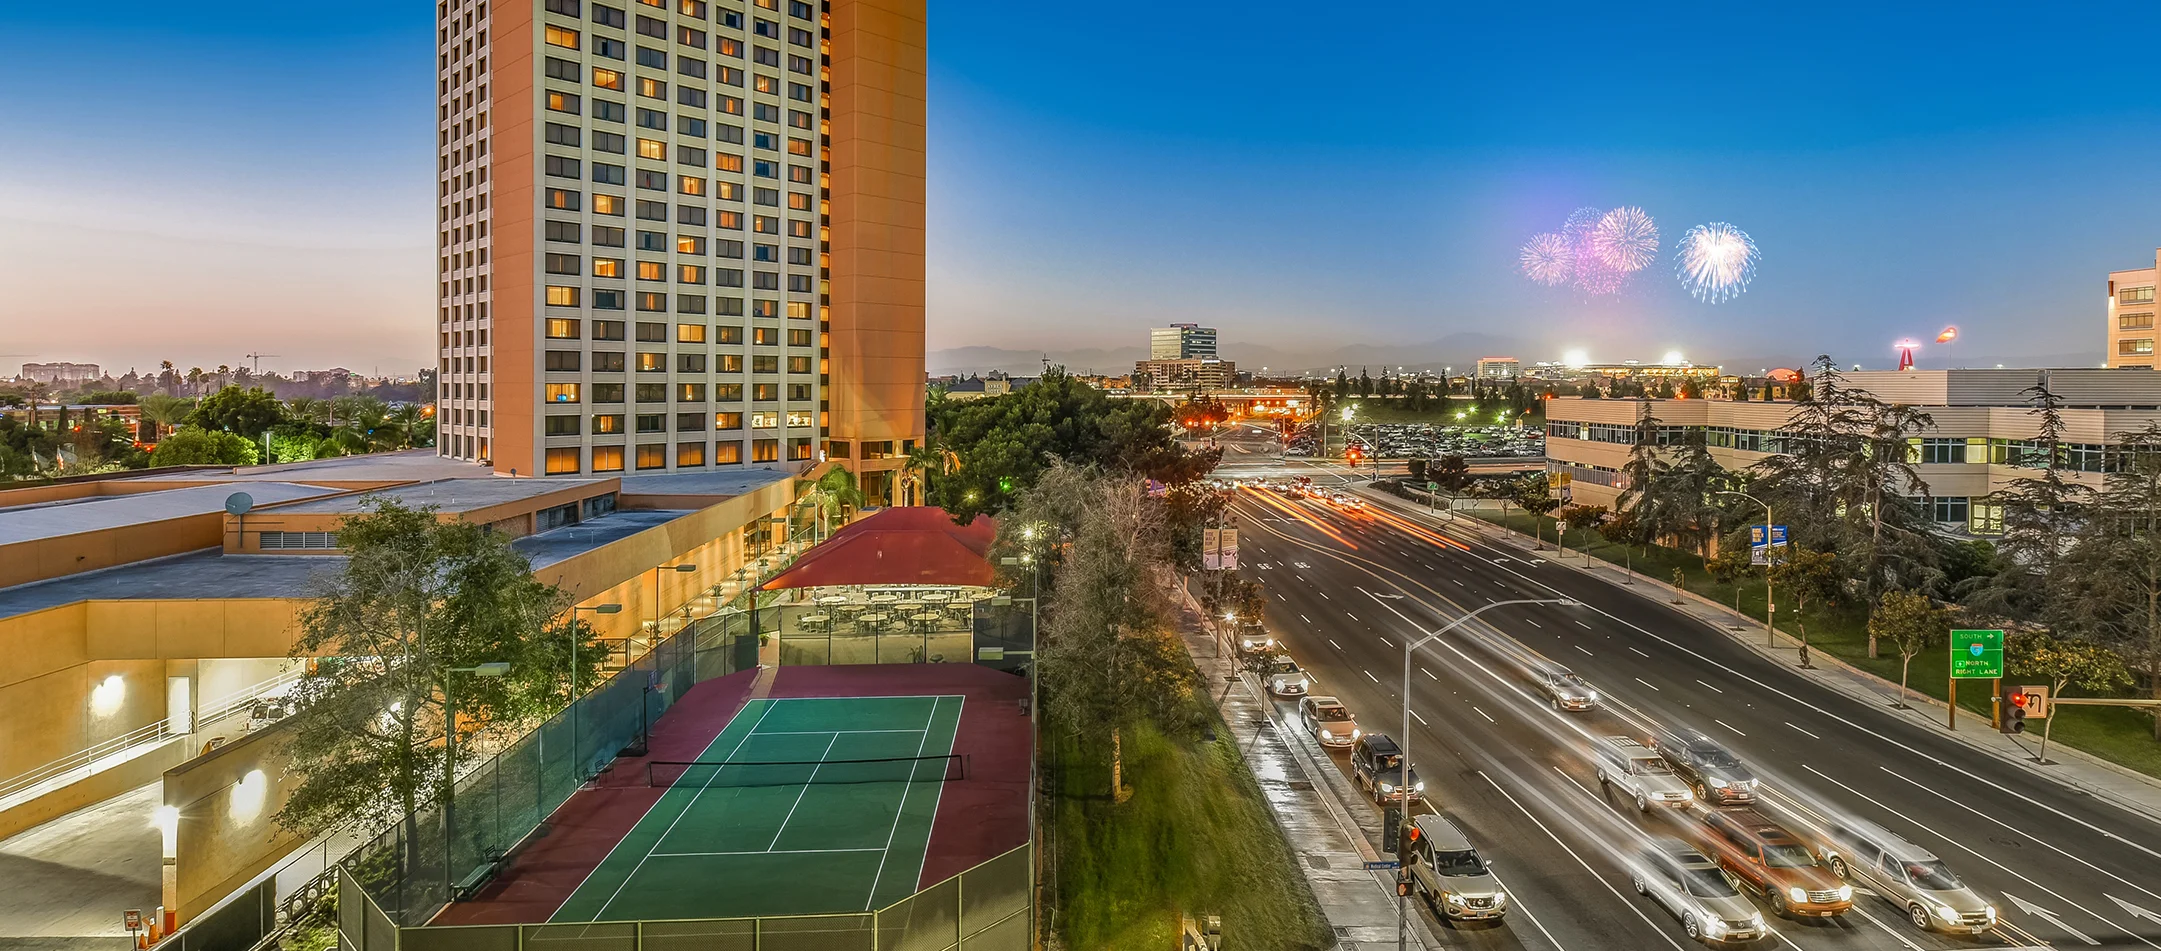 exterior of DoubleTree by Hilton Hotel Anaheim - Orange County with fireworks view